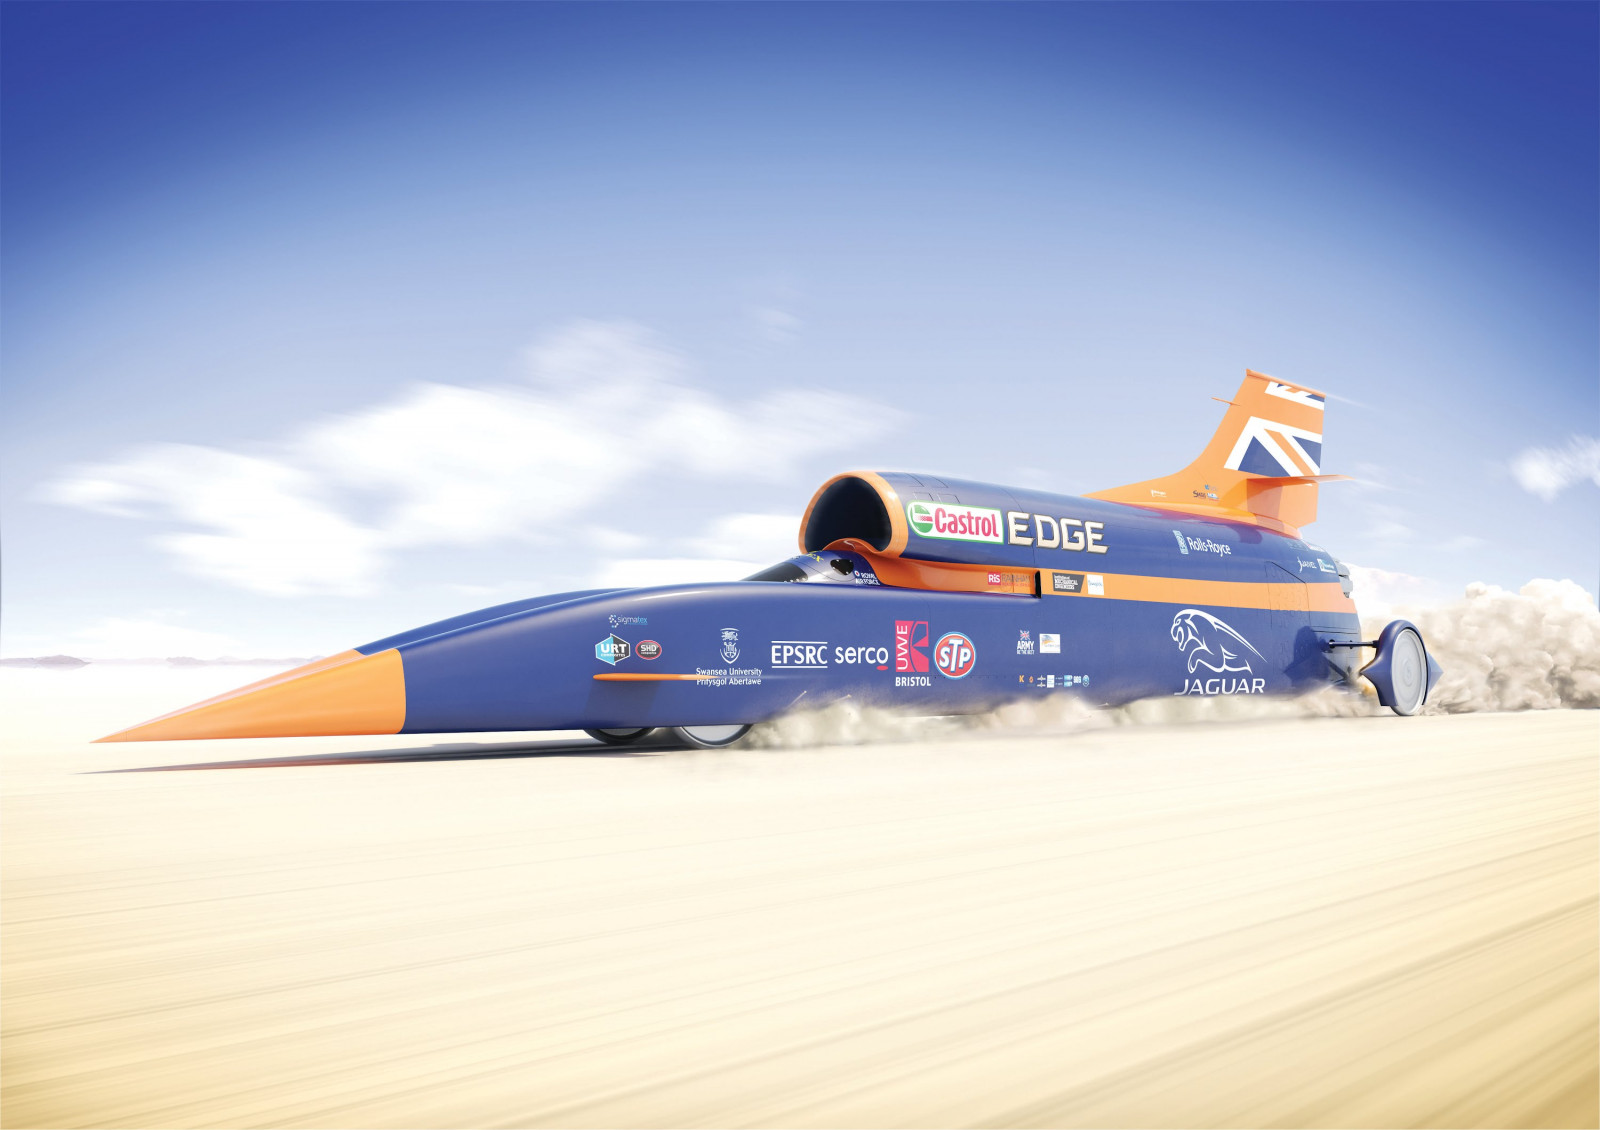 Expo ‘star’ Bloodhound SSC saved from collapse as new buyer comes forward